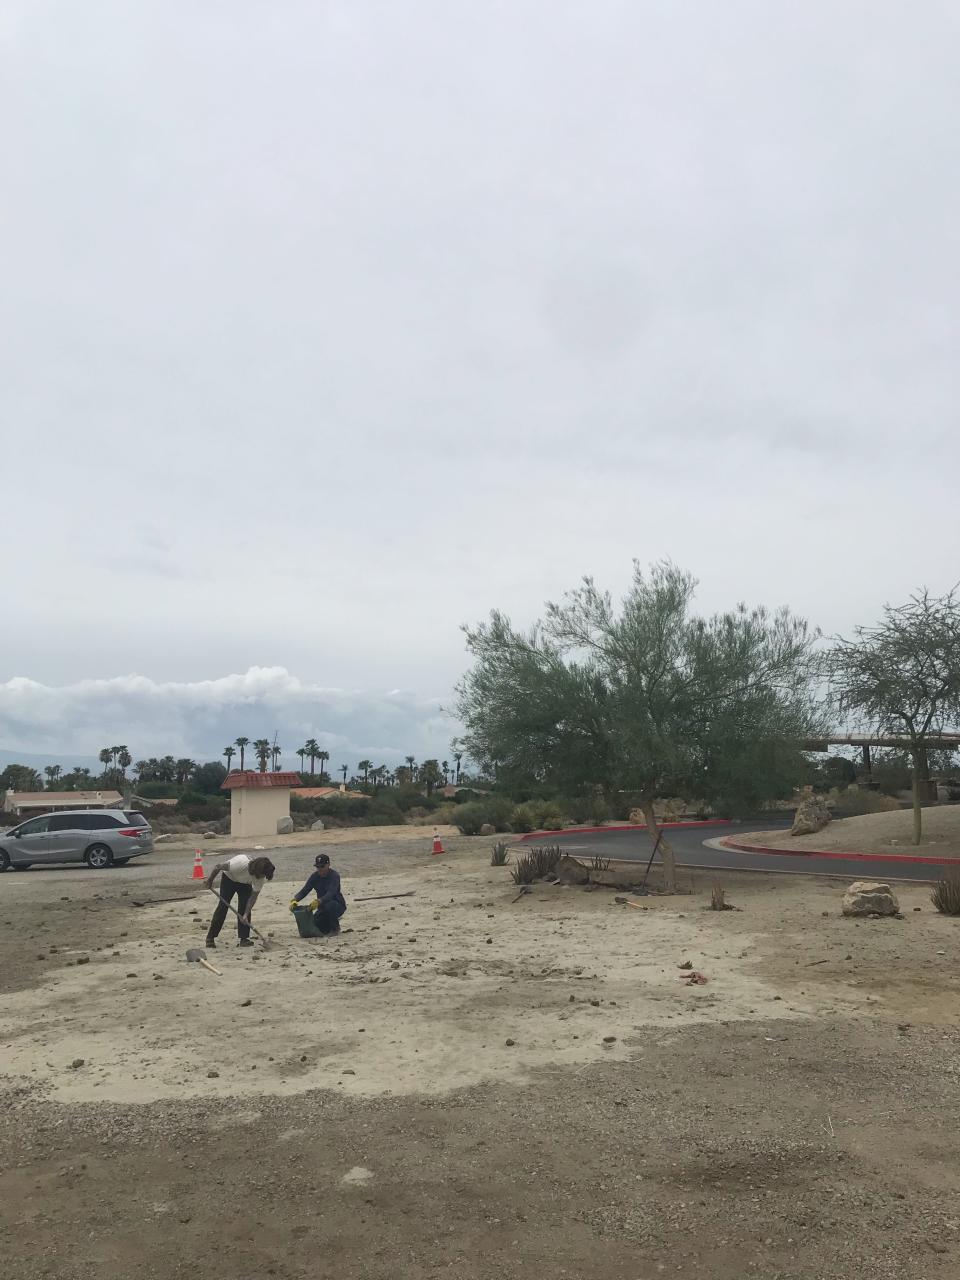 Rancho Mirage ran out of sand at its distribution site at the Rancho Mirage Library & Observatory parking lot Saturday, Aug. 19, so many people took their empty bags to a nearby empty lot to fill them with sand straight from the ground.